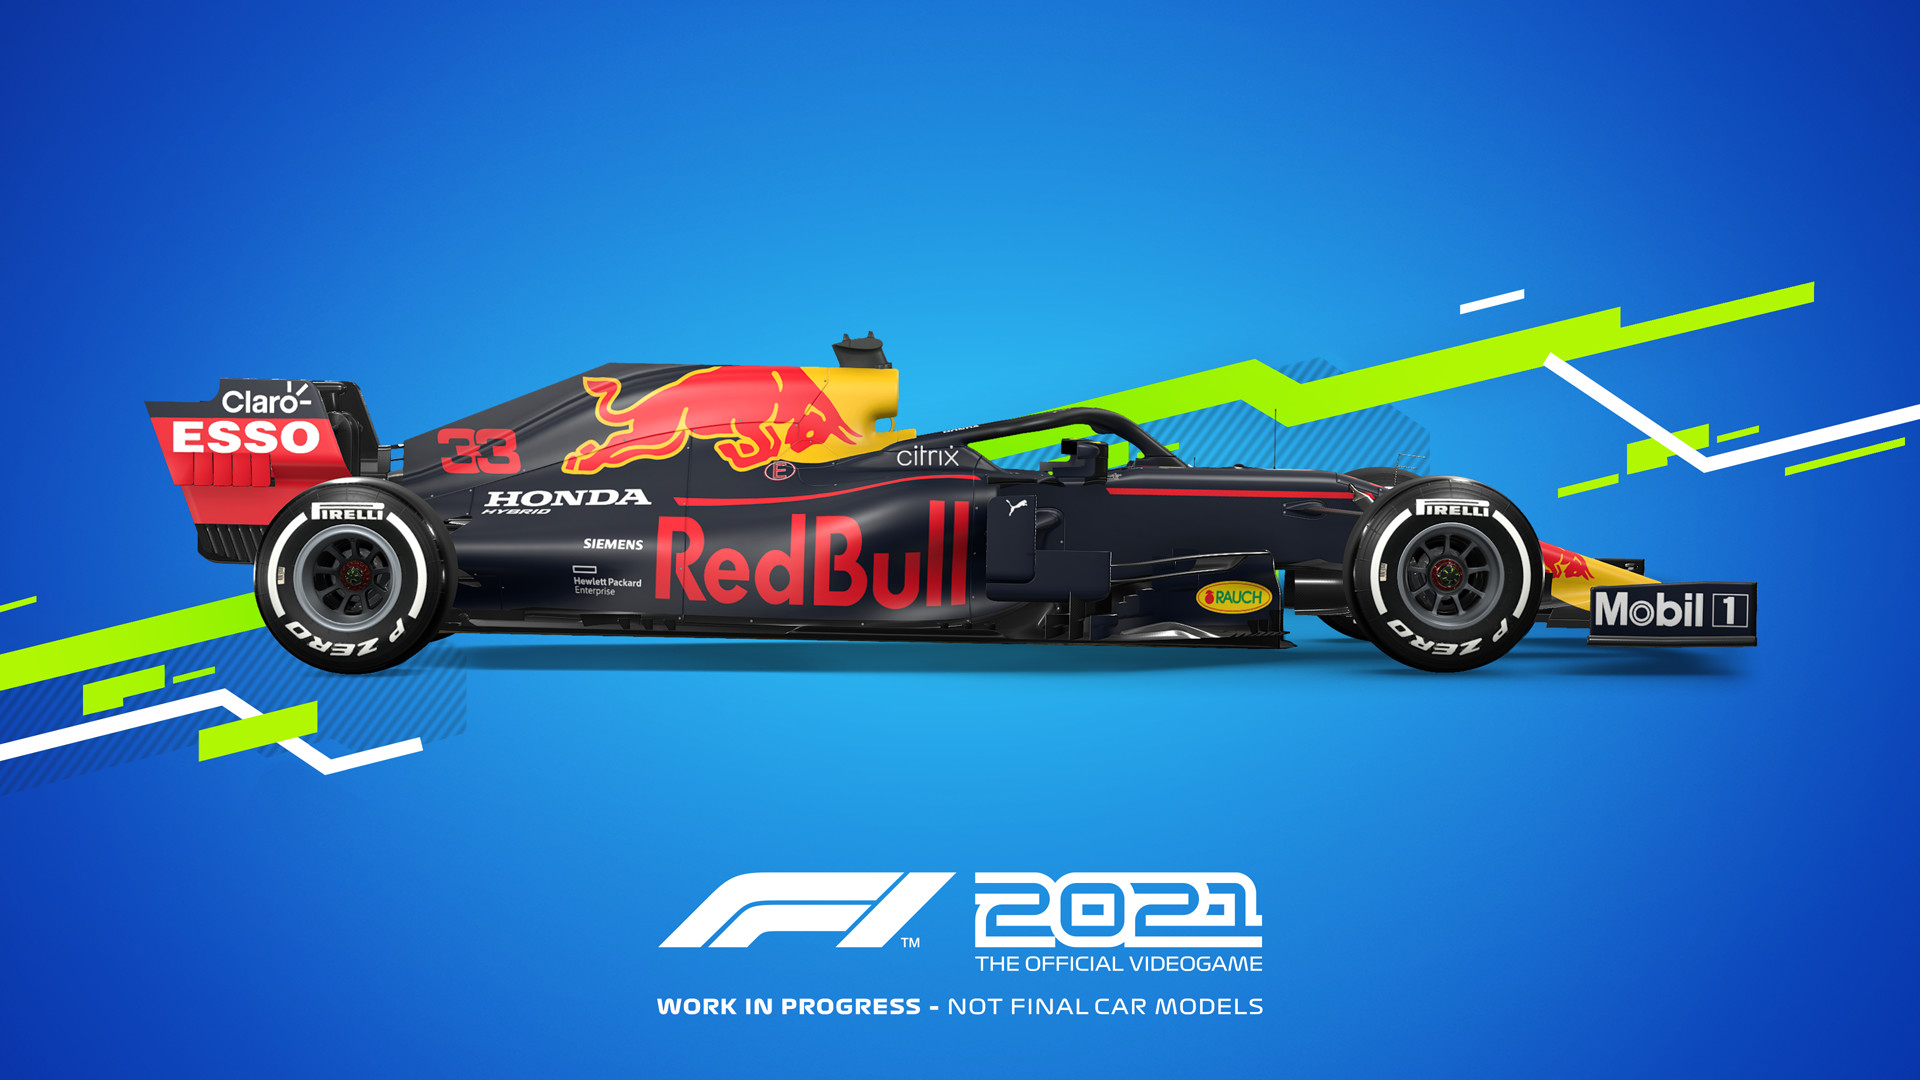 F1 2021 PlayStation 4 Account Pixelpuffin.net Activation Link